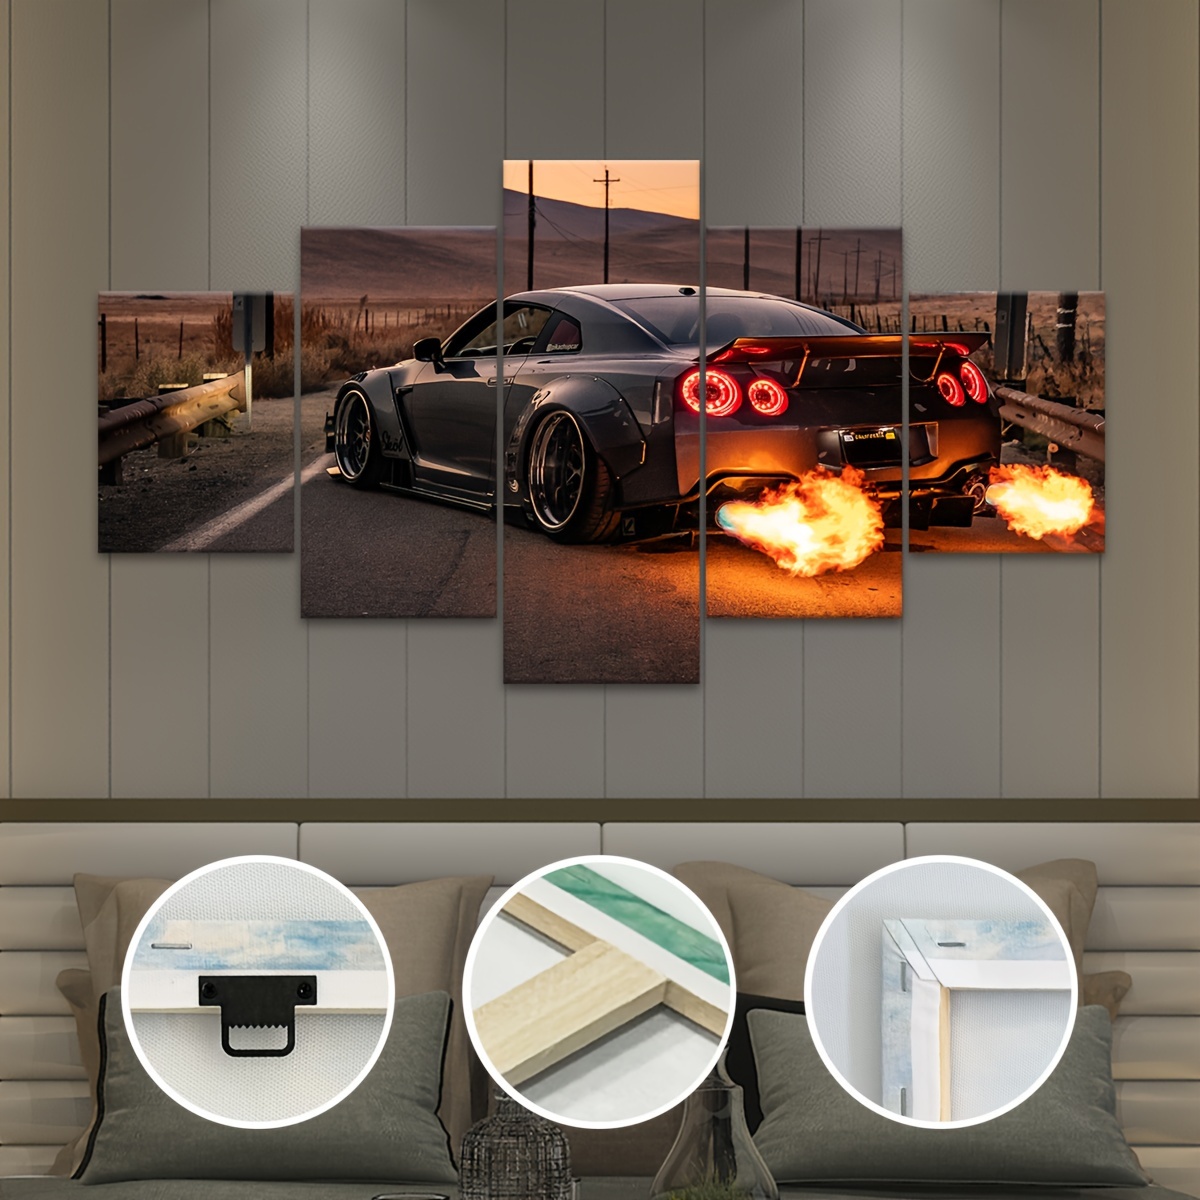 

5pcs Wooden Framed Canvas Poster, Modern Art, Cool Black Sports Car Canvas Poster, Ideal Gift For Bedroom Living Room Corridor, Wall Art, Wall Decor, Winter Decor, Wall Decor, Room Decoration